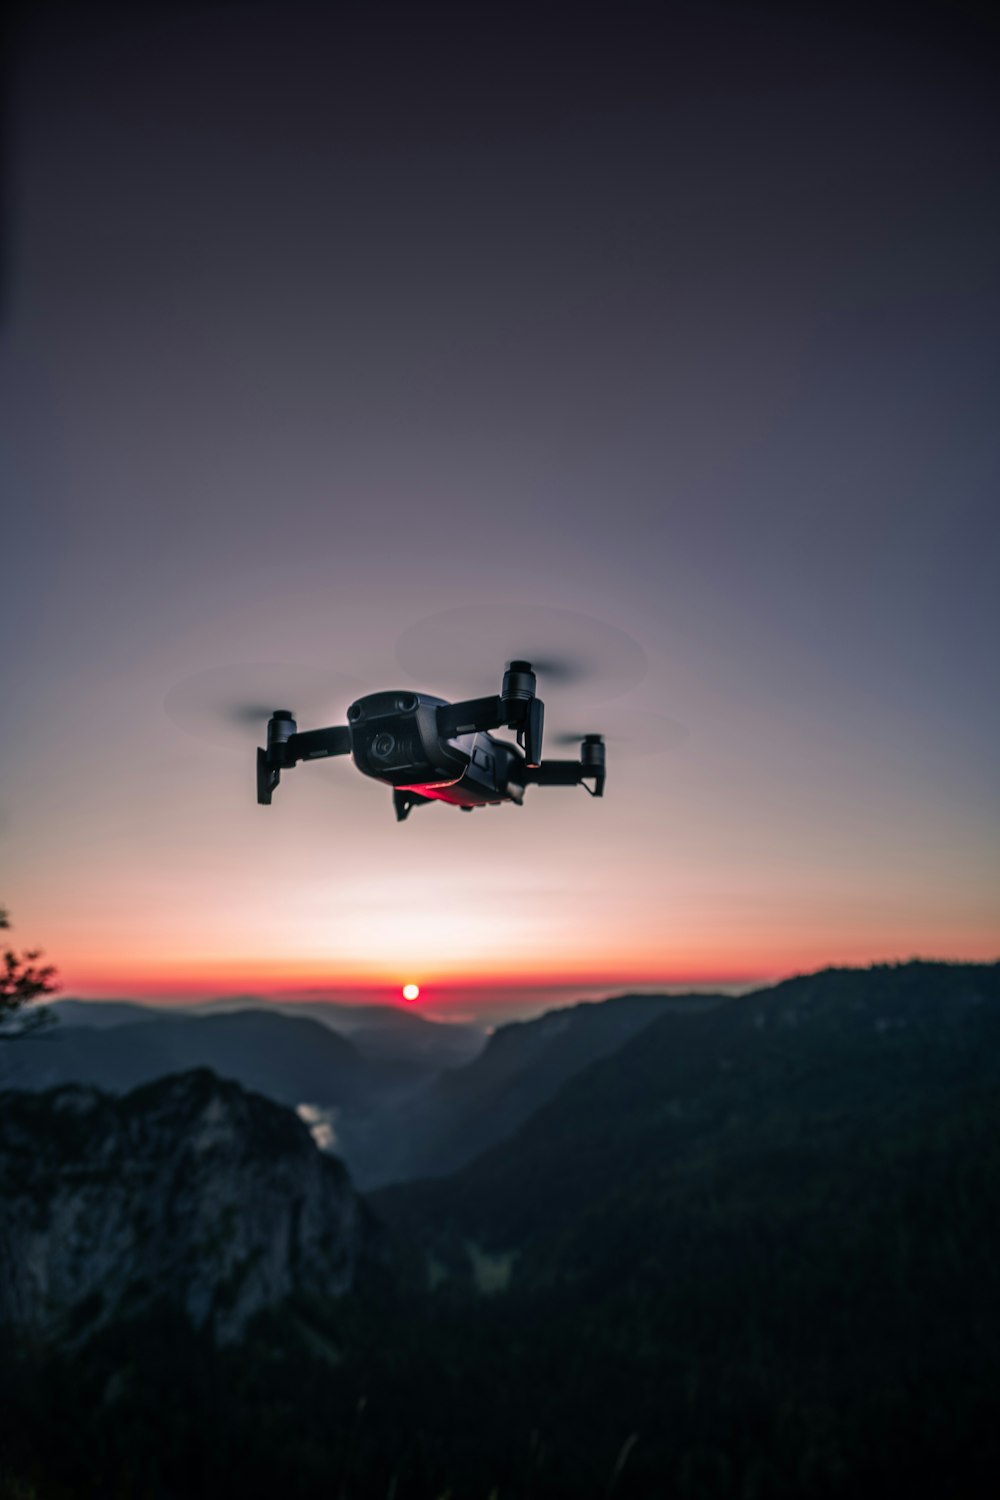 view photography of black quadcopter drone on air during dawn